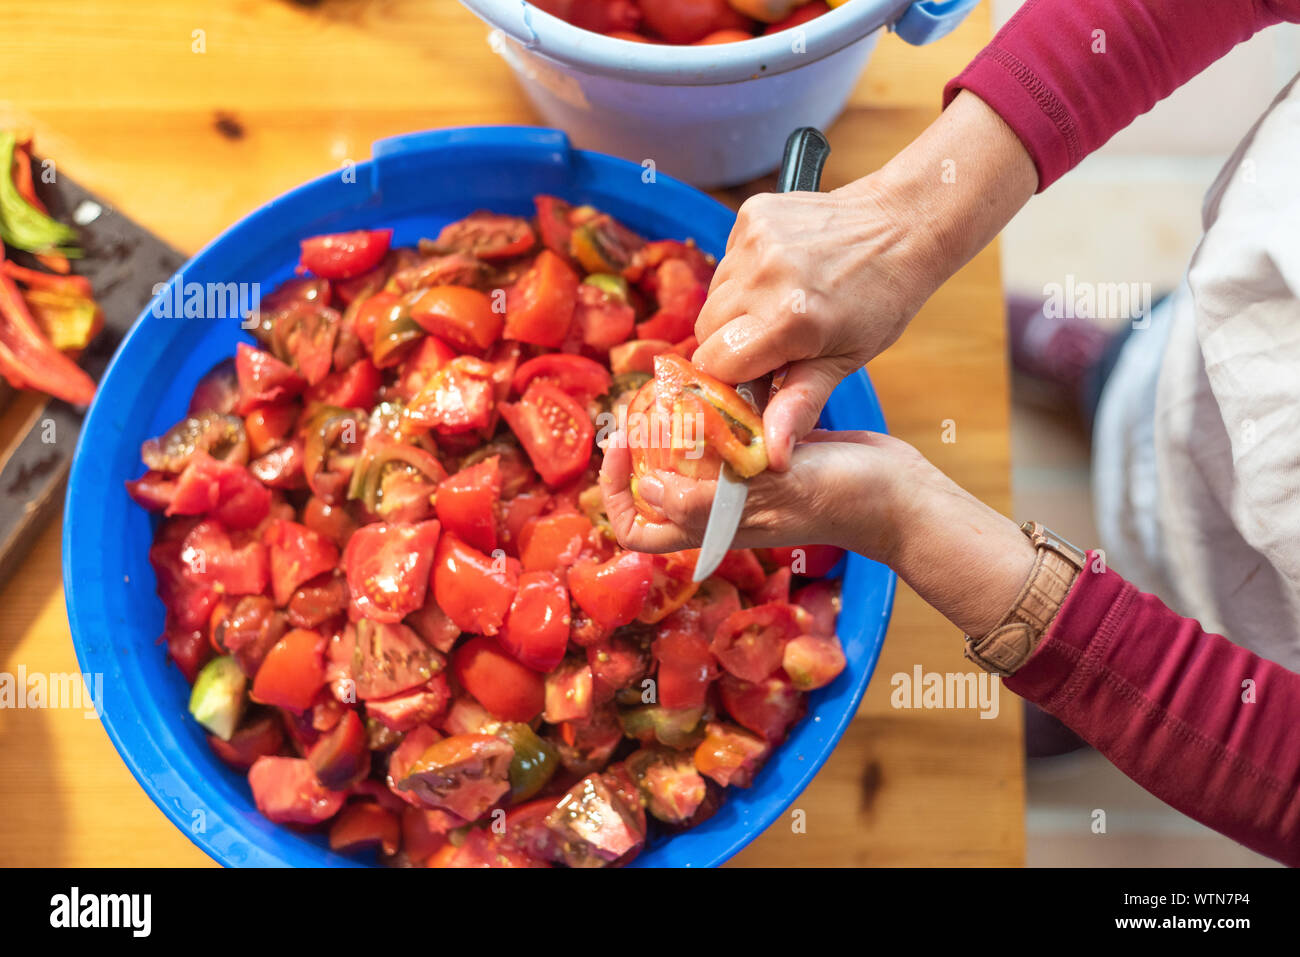 Woman cutting large amount of tomatoes for prepare tomato sauce. Preparation of tomatoes for cooking .  Stock Photo